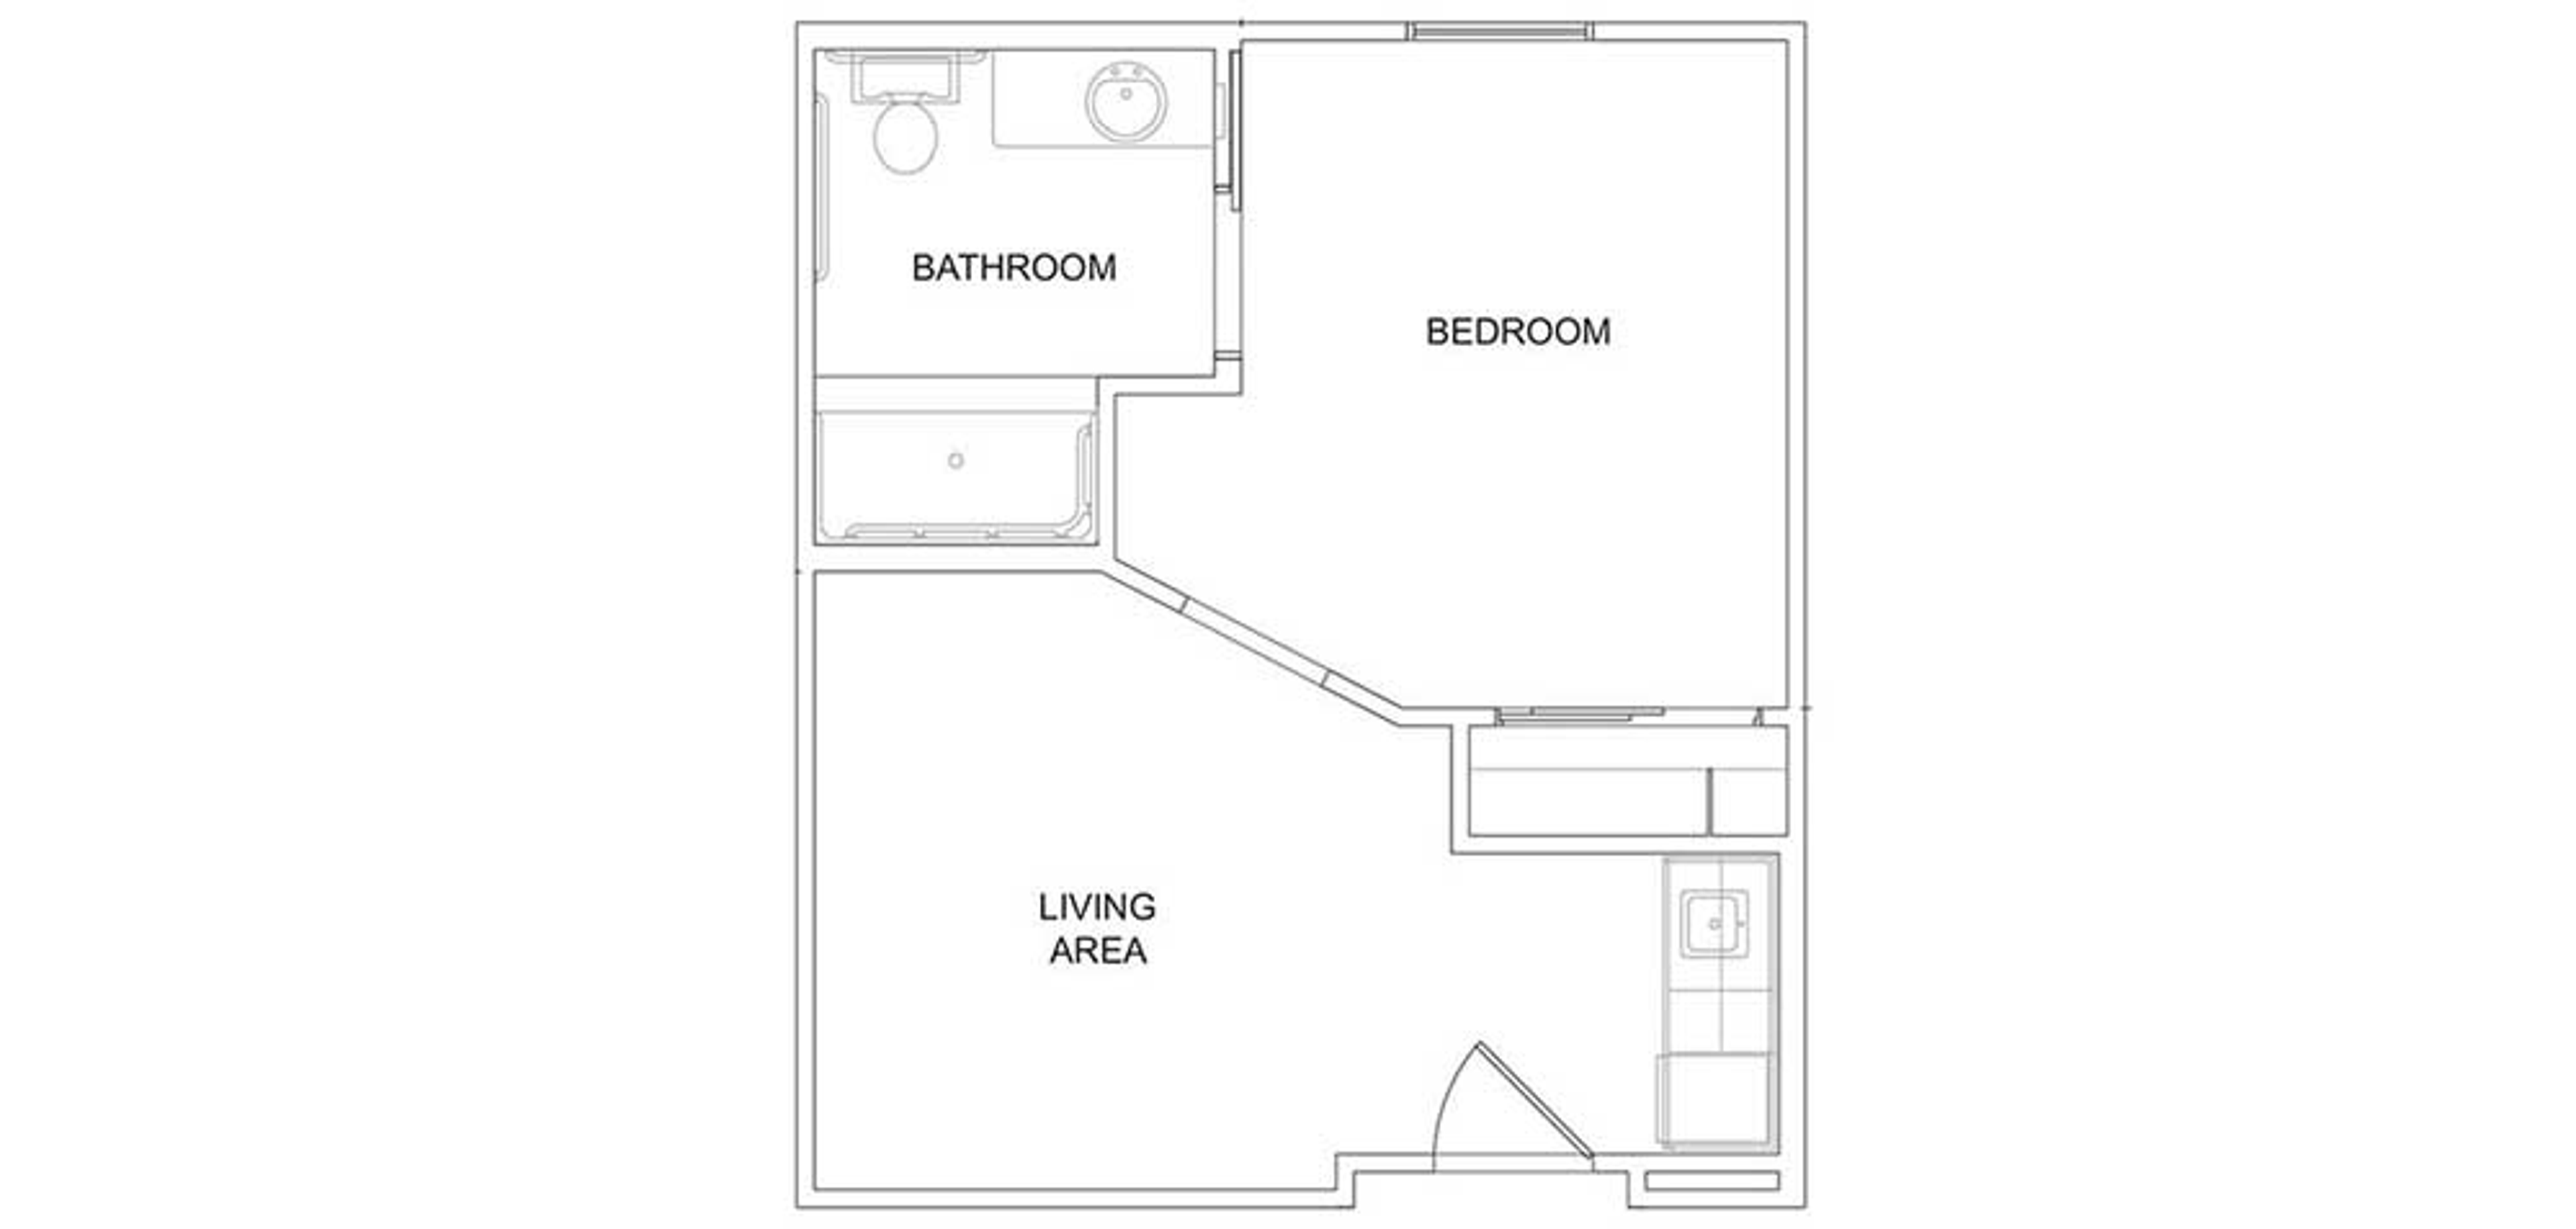 Floorplan - Magnolia Court - 1B 1B Deluxe Assisted Living